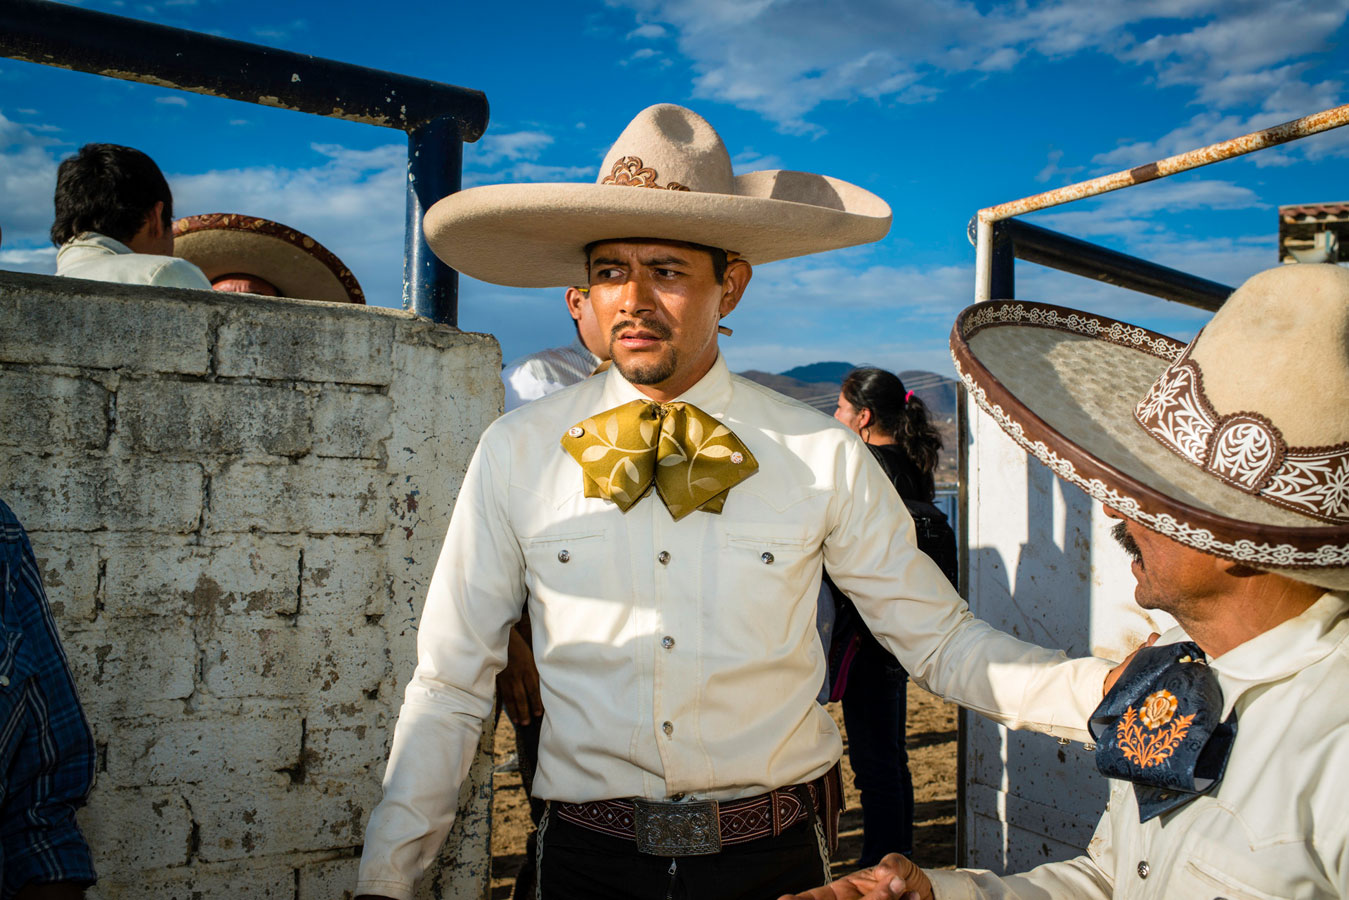 Charros – Mexican Horsemen, © Anja Bruehling, Chicago, IL, United States, First Place, World In Focus - The Ultimate Travel Photography Competition